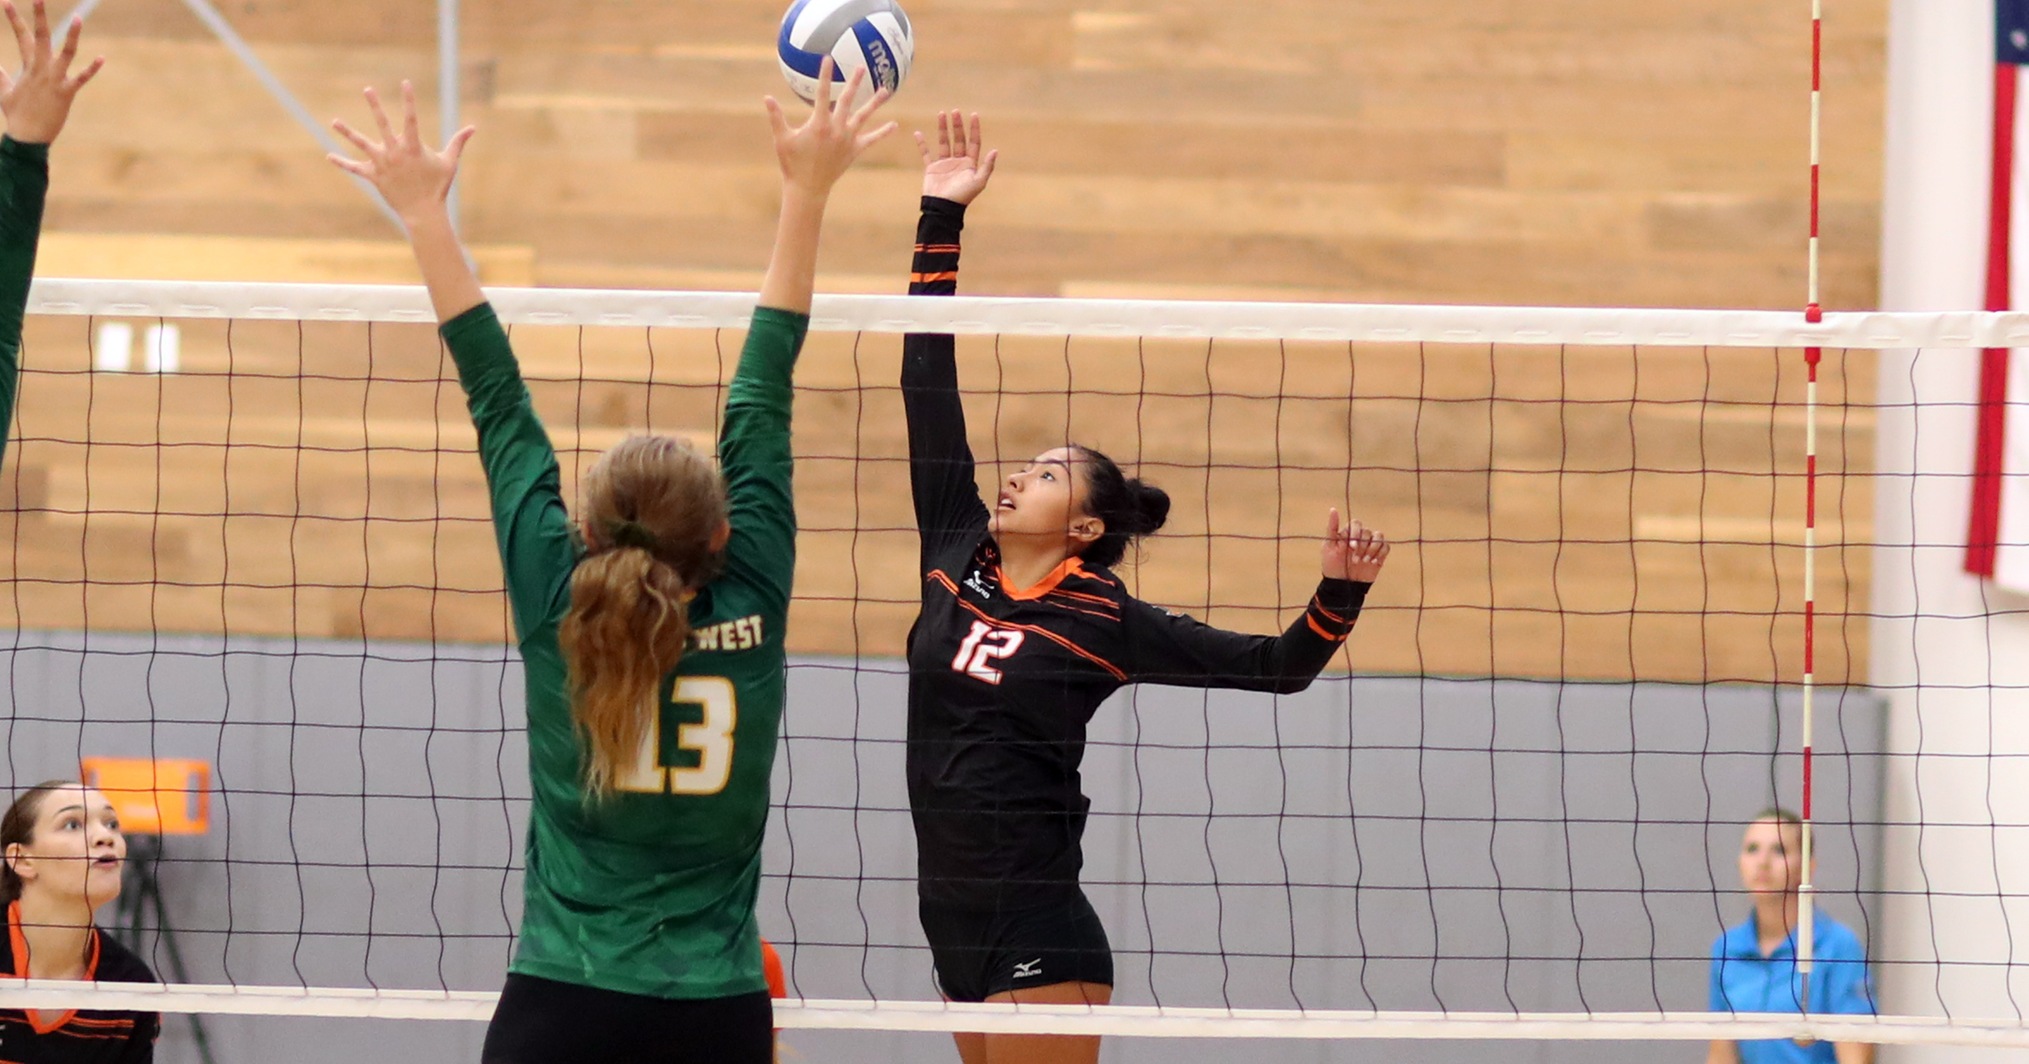 No need to dust off the cobwebs for Vashti Elias-Romero as she picked up right where she left off last season with 10 digs, seven kills and an ace in a win over Cerro Coso. (Photo: Bobby R. Hester)